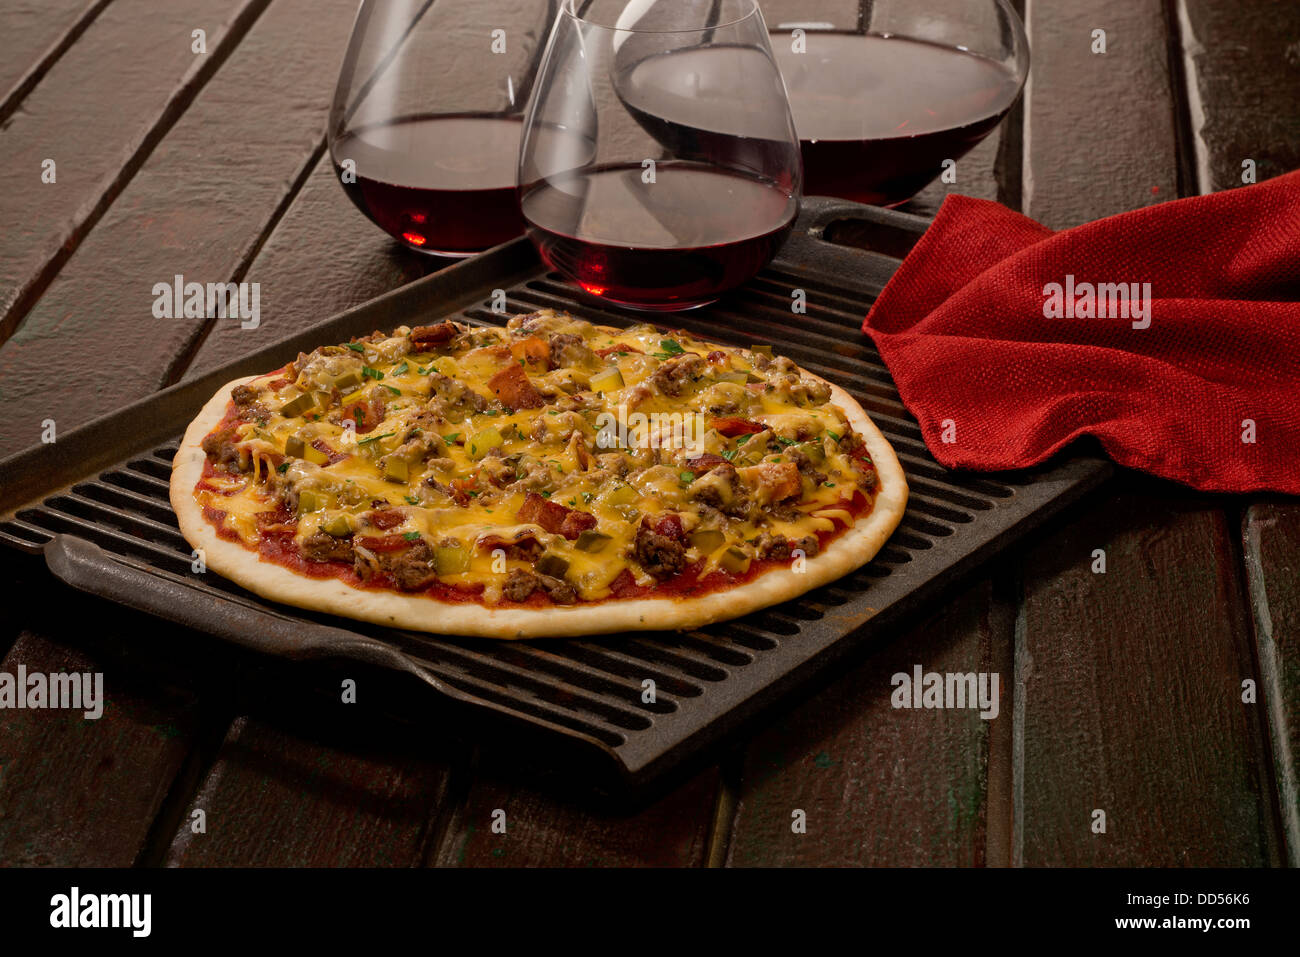 Cheeseburger Pizza as an appetizer with red wine. Stock Photo